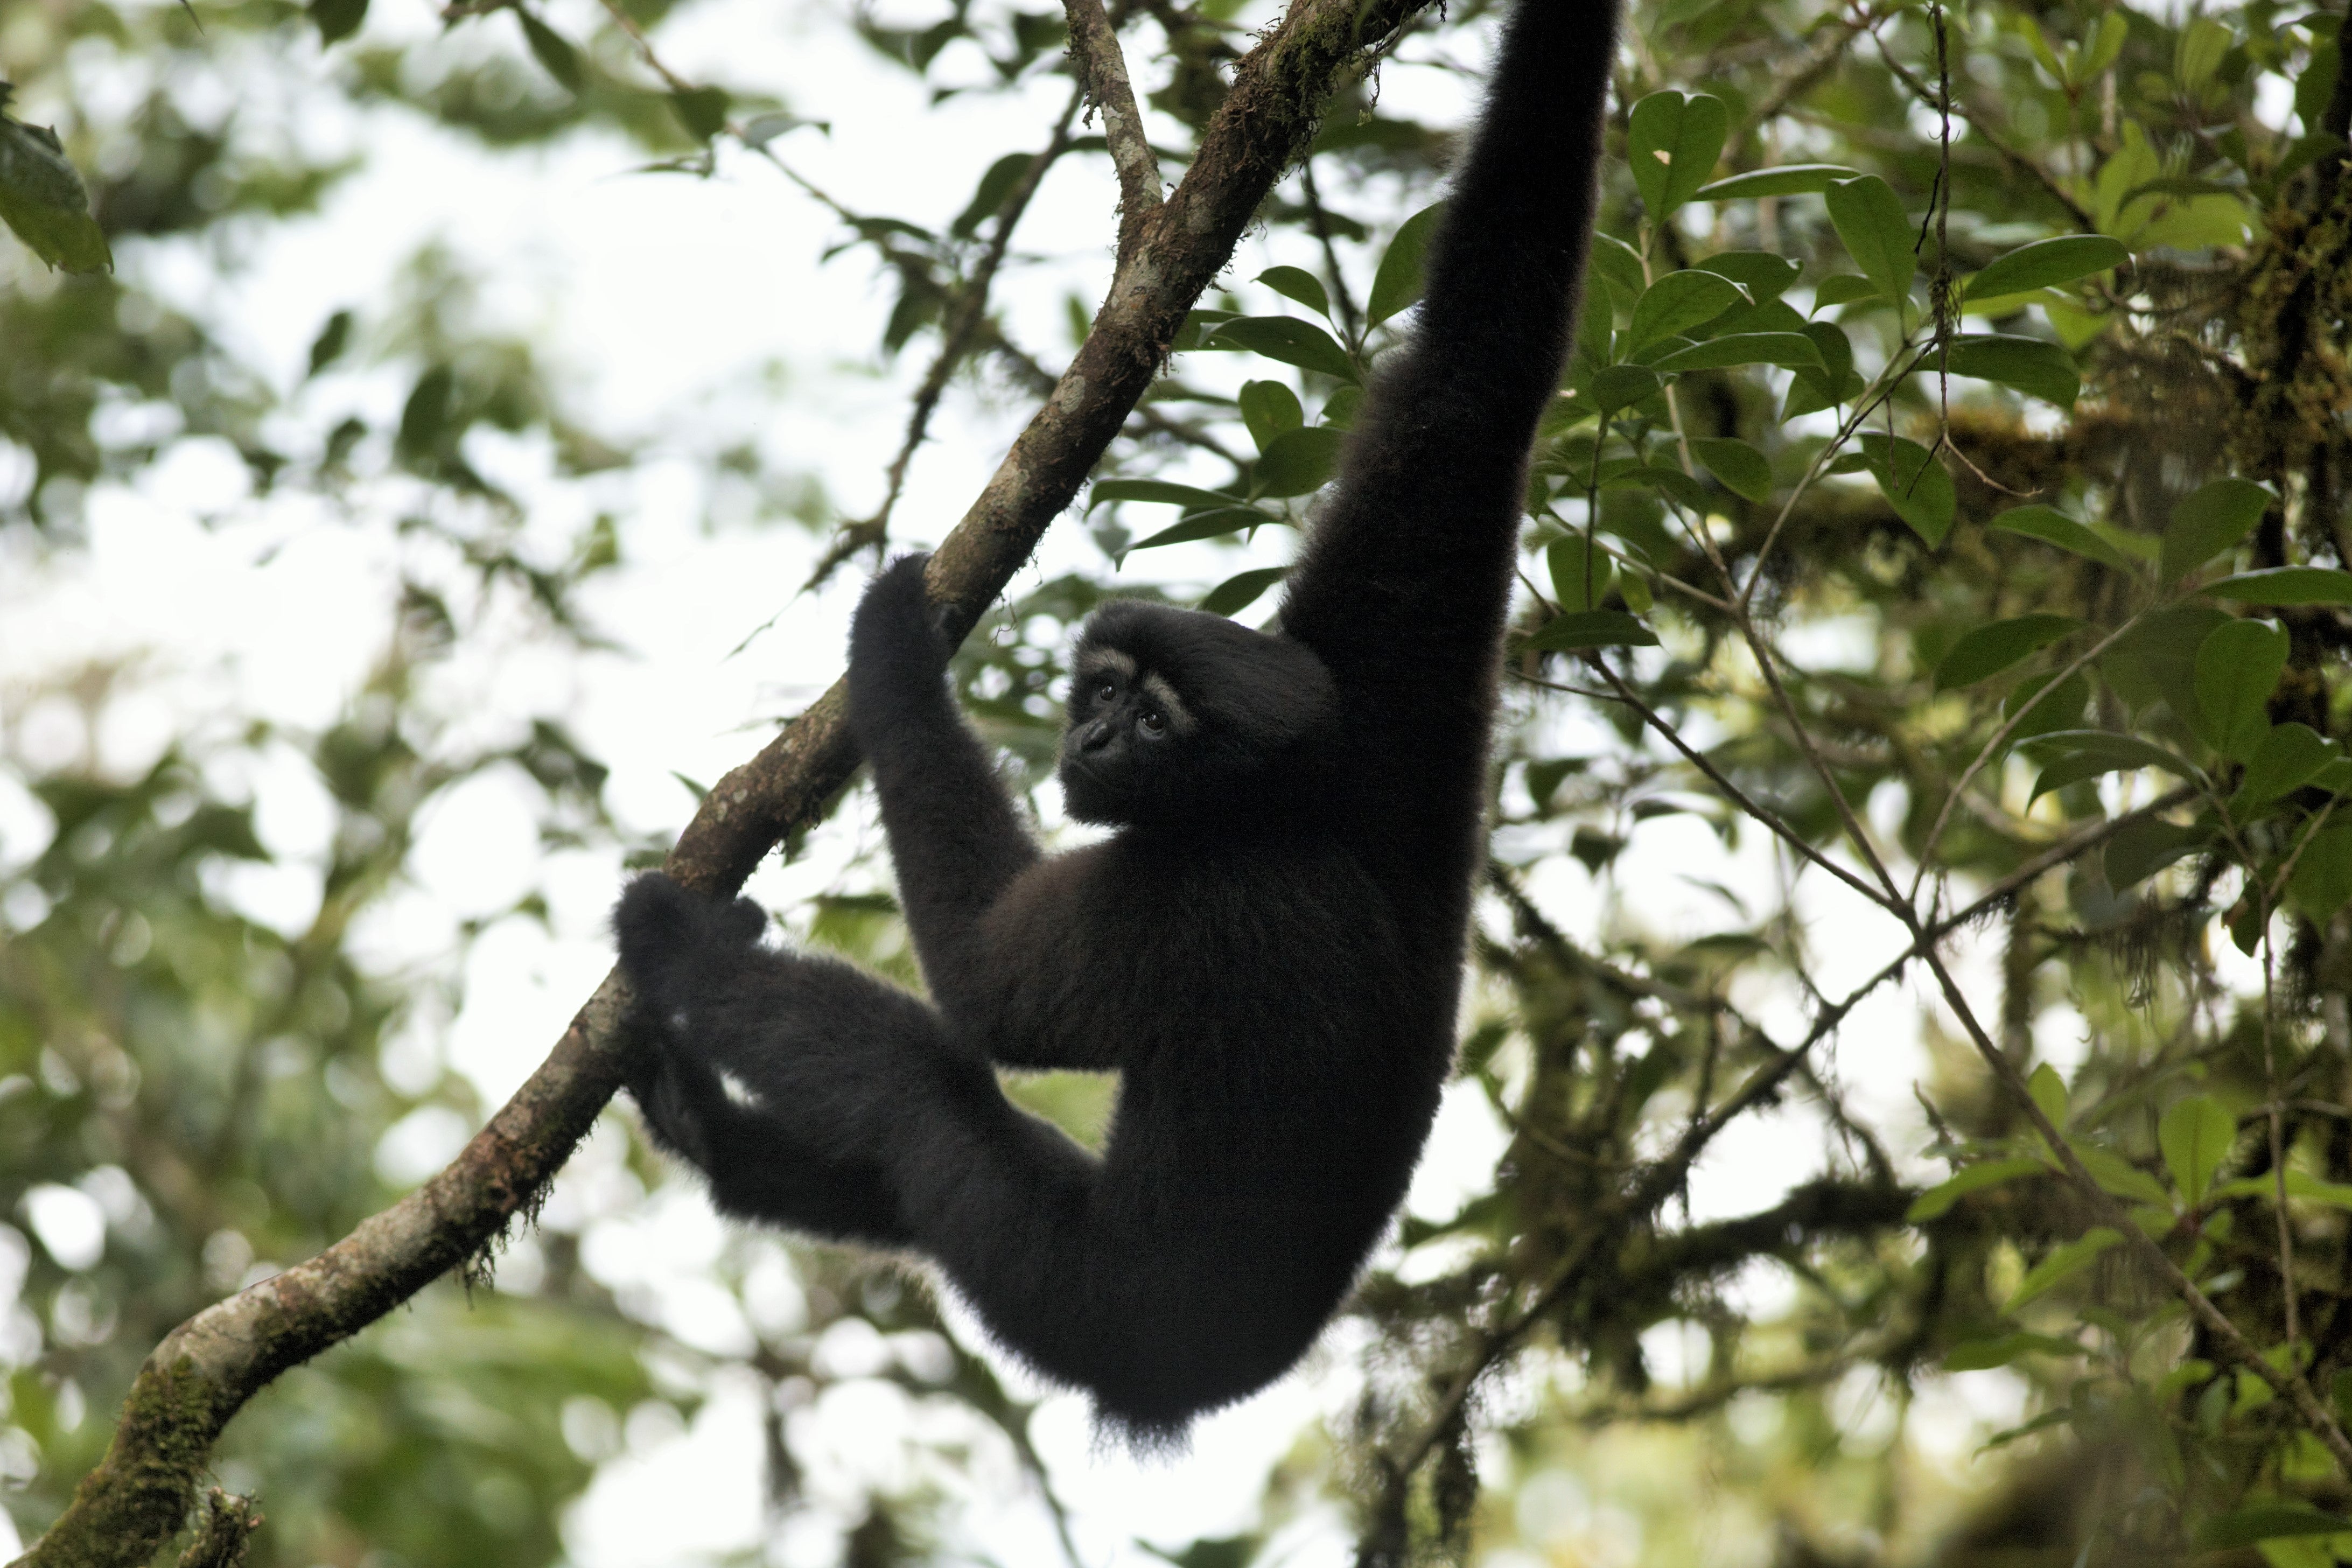 Adult male Skywalker gibbons hangs from a tree